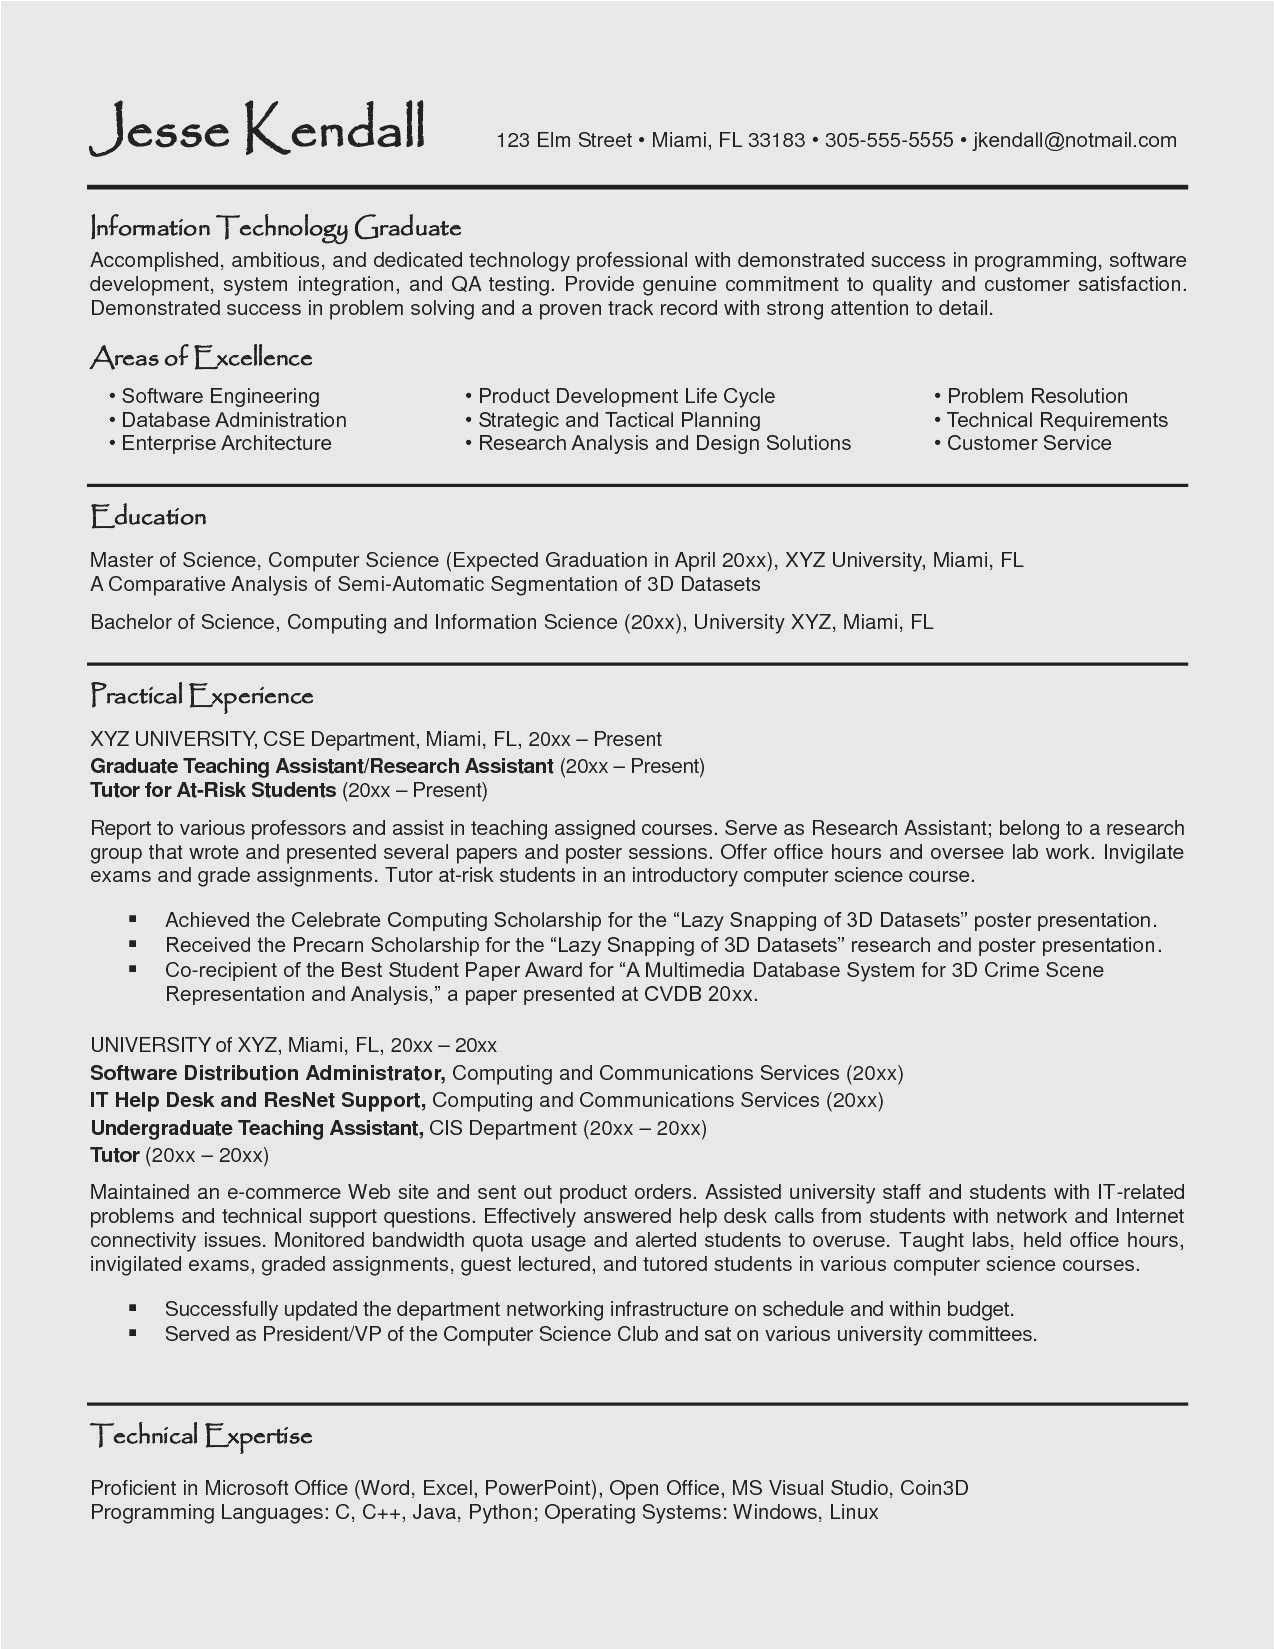 Free Resume Templates for Entry Level Jobs Free Collection 60 Entry Level Resume Template 2019